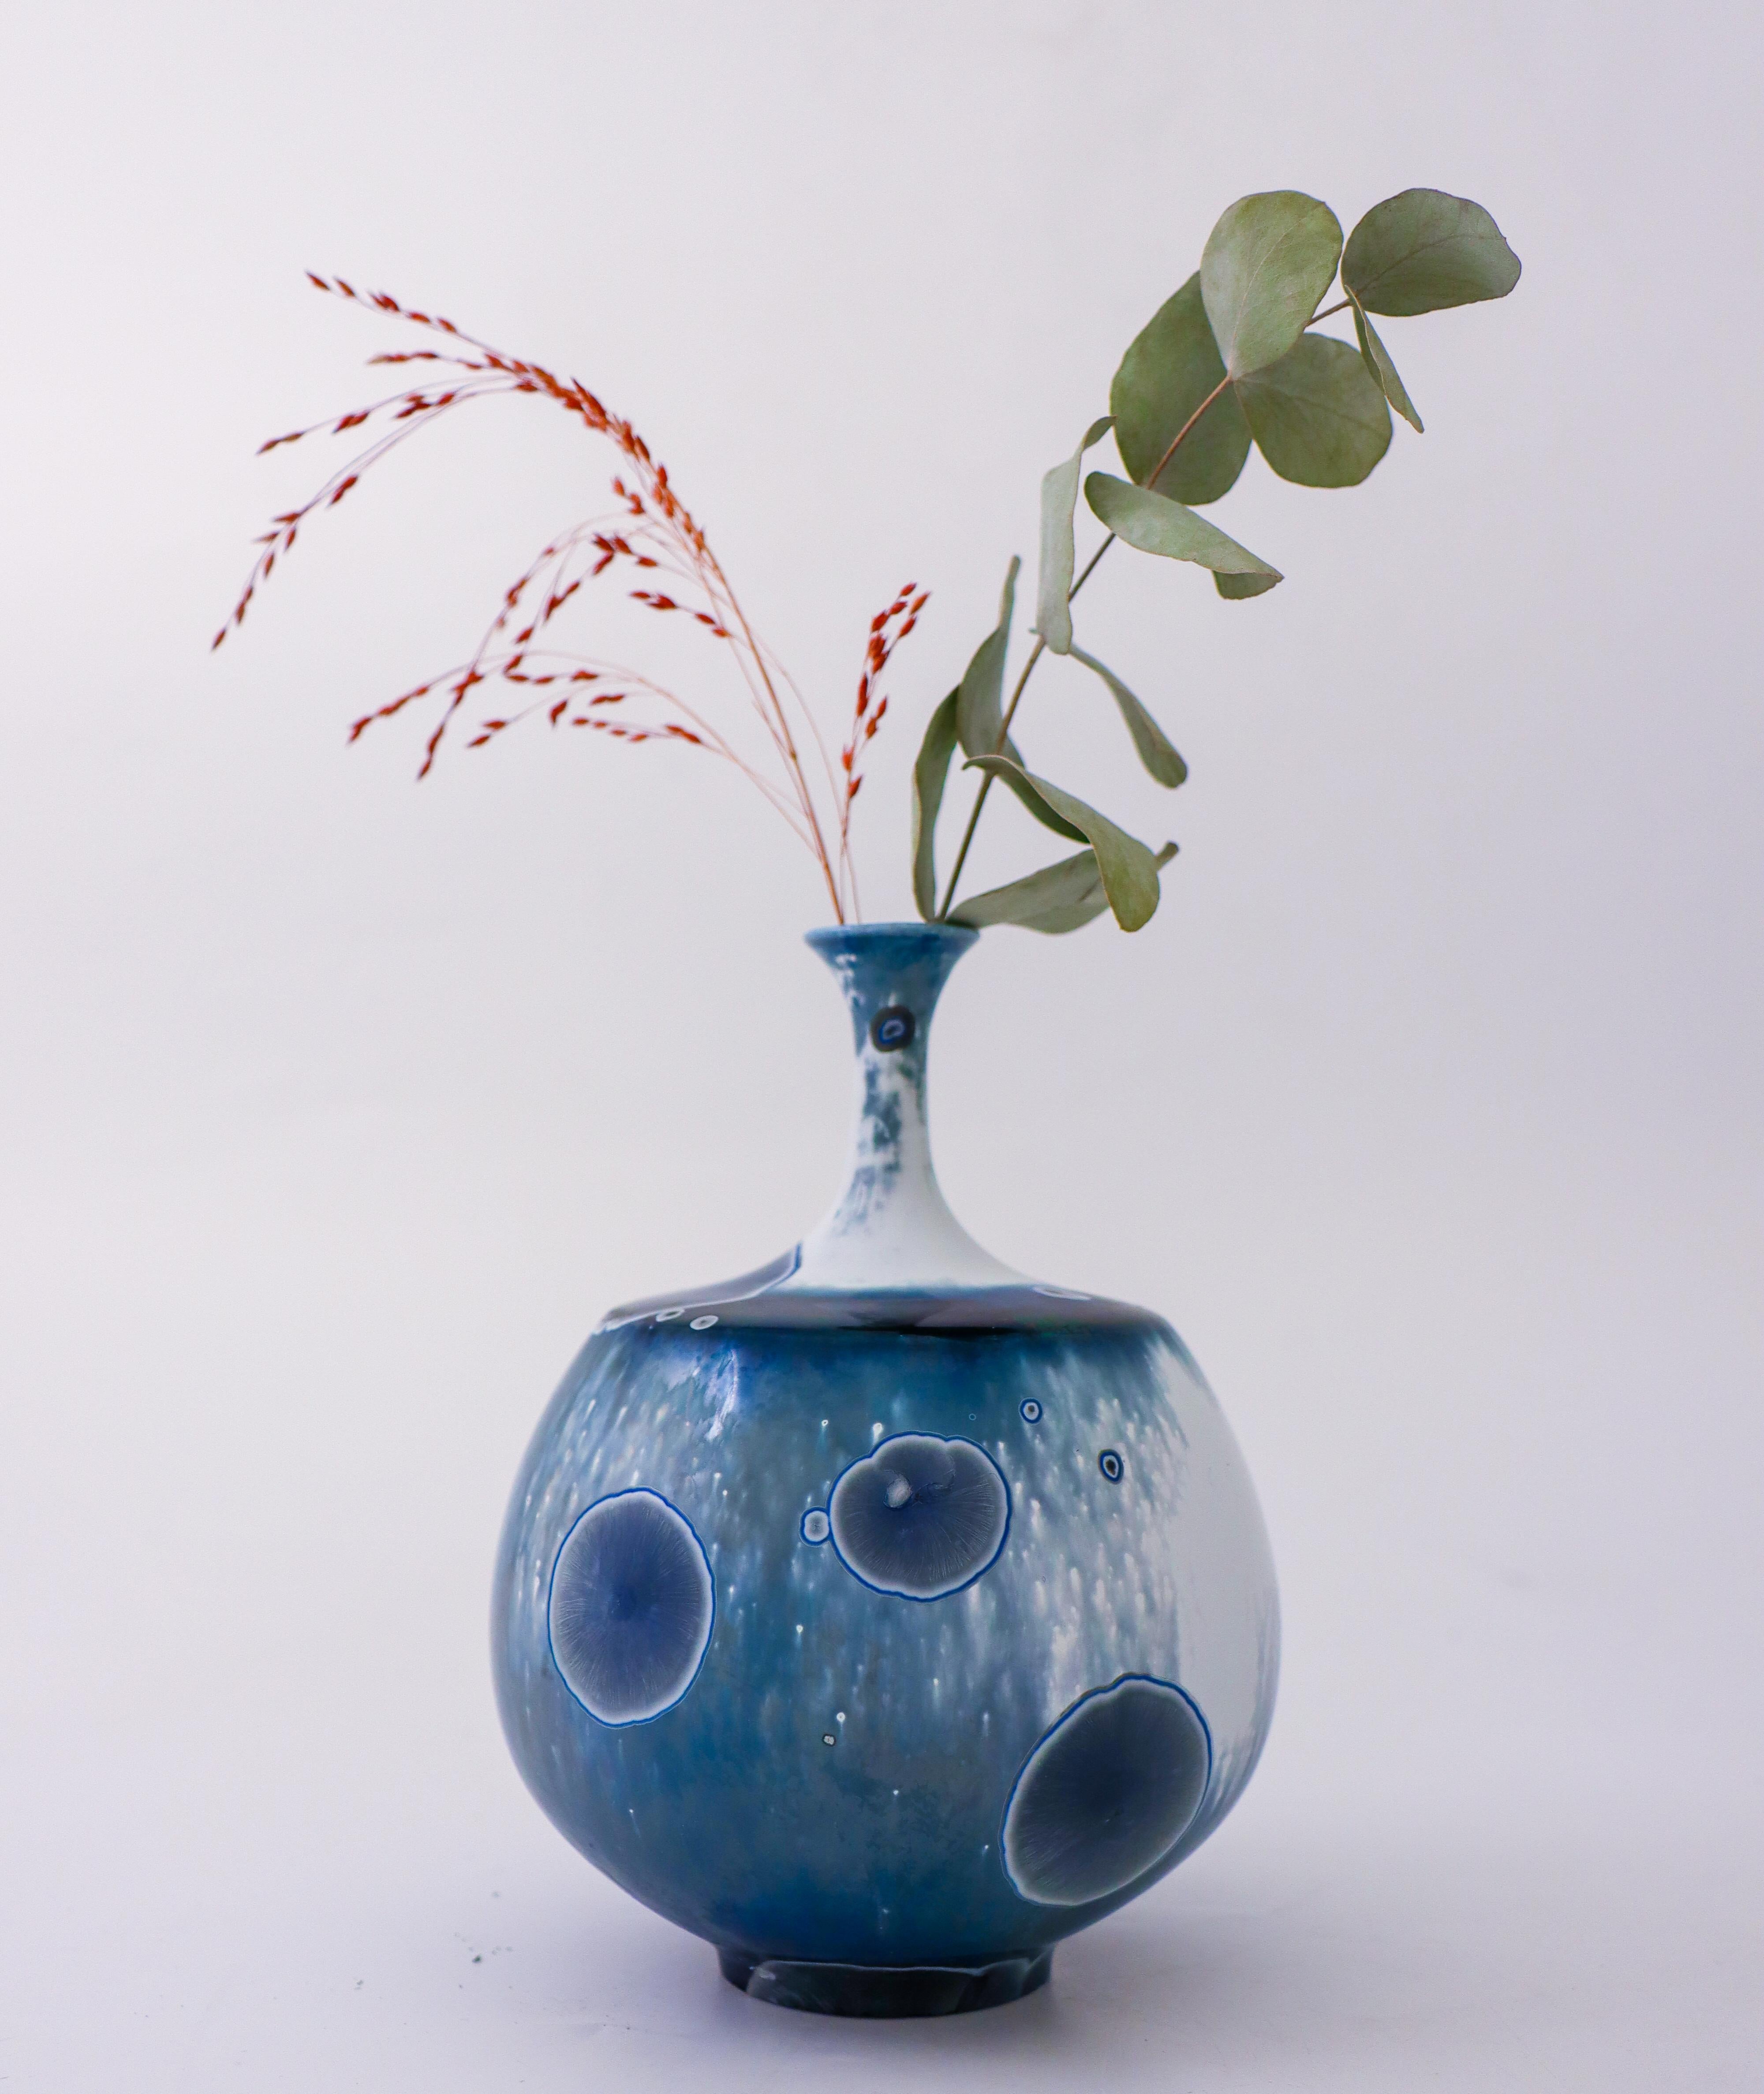 A white & blue vase with a lovely crystalline glaze designed by Isak Isaksson in Sweden. The vase is 16 cm (6.4